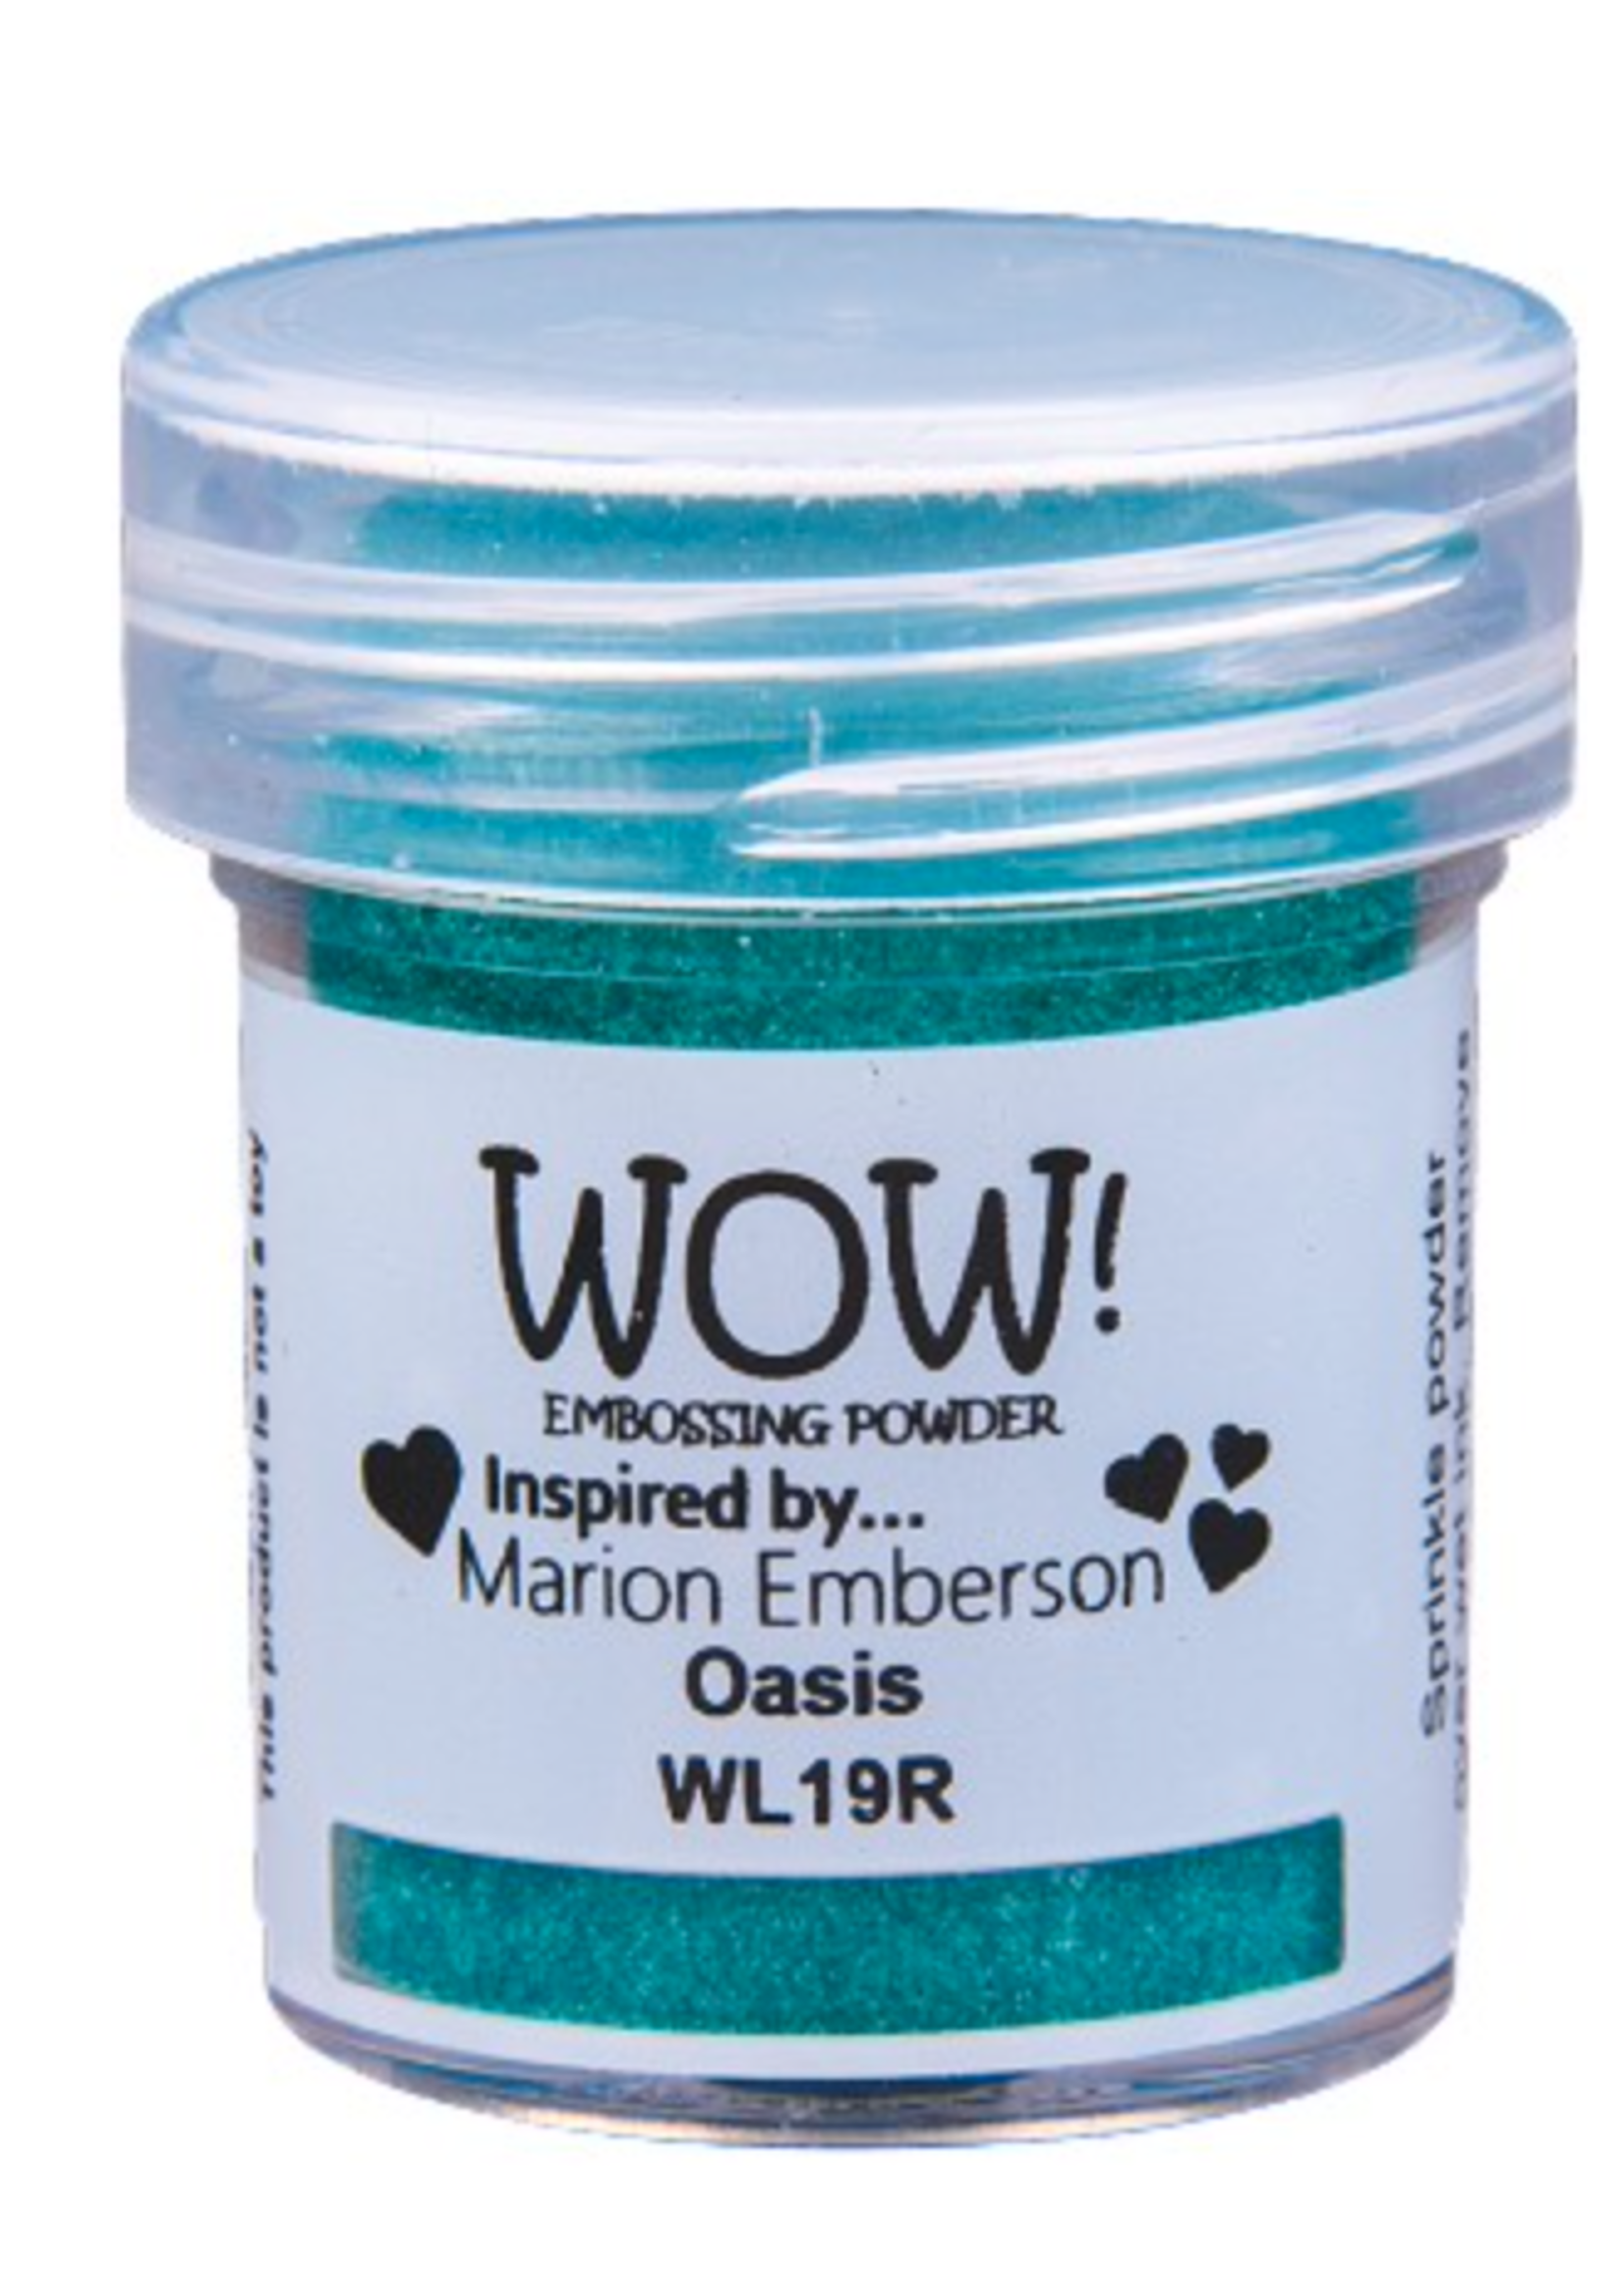 wow! Wow! Embossing Powder Oasis